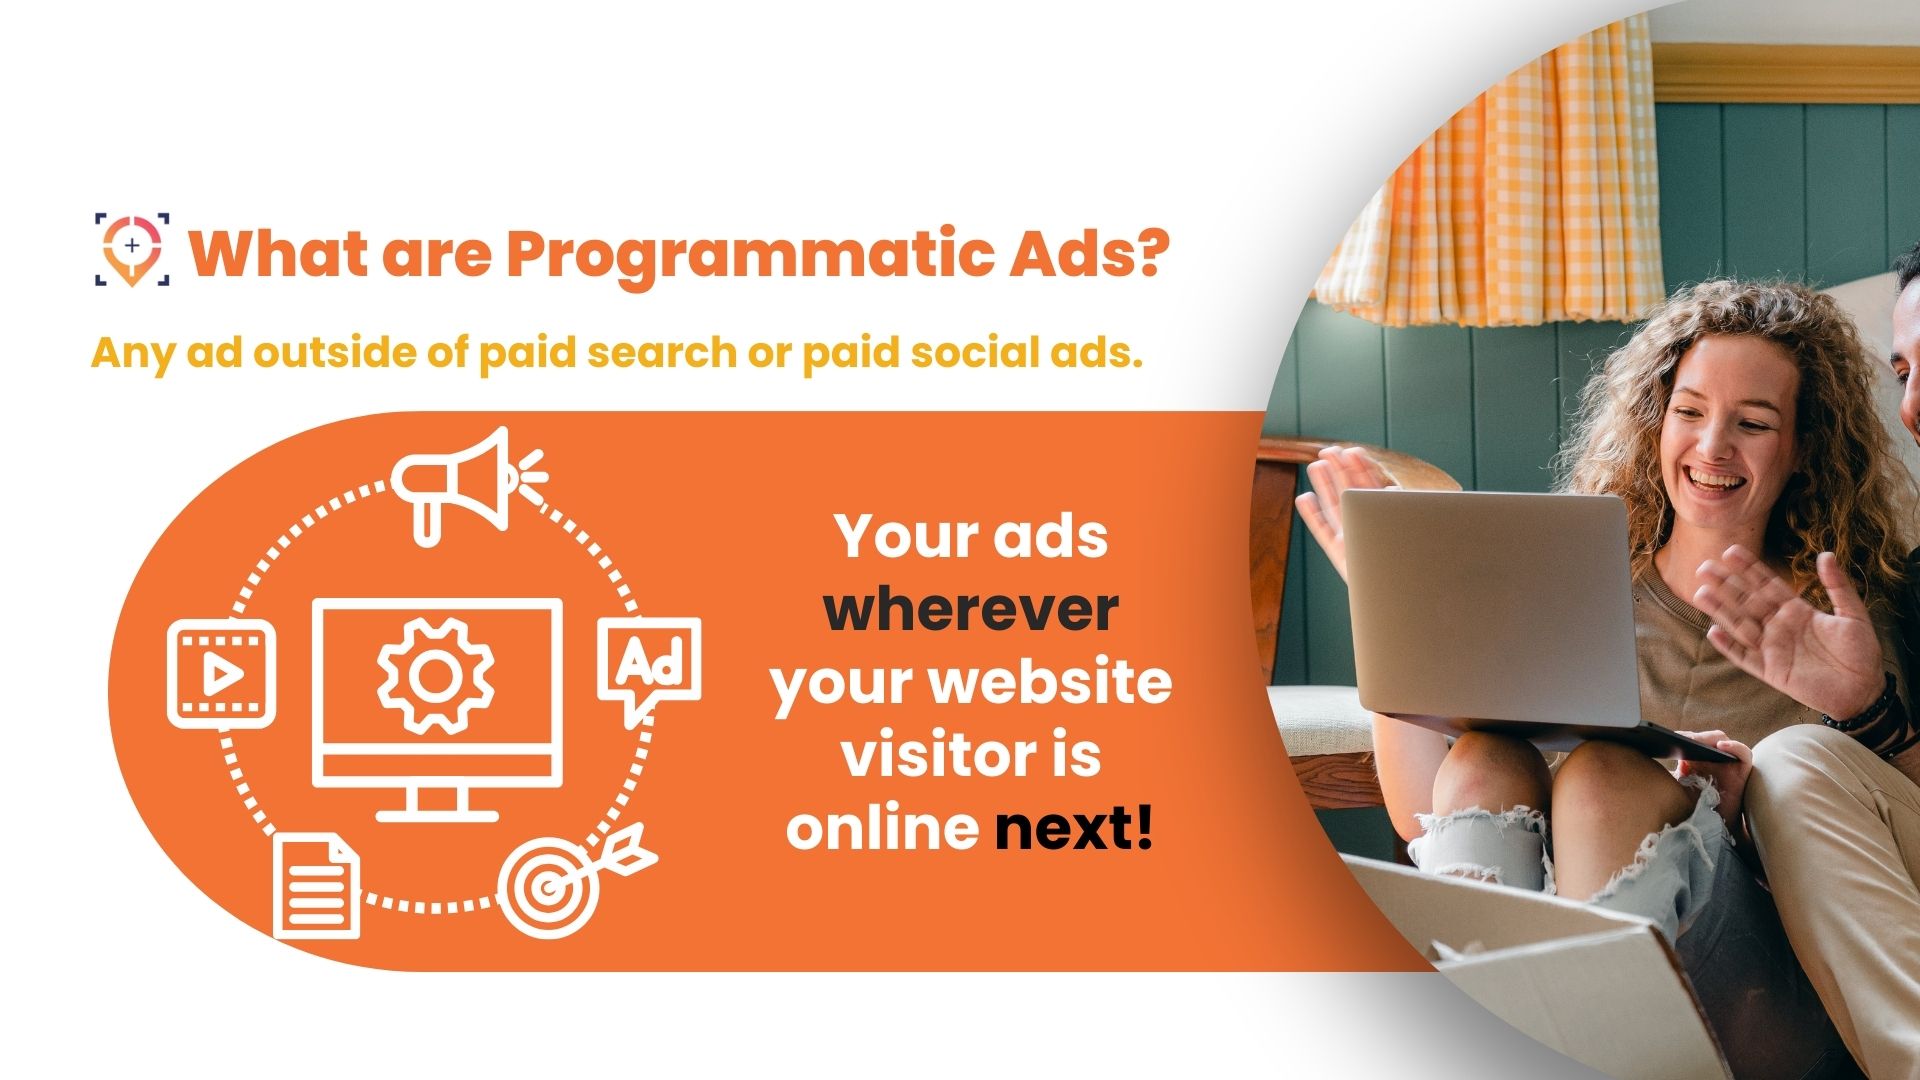 Programmatic Advertising Overview